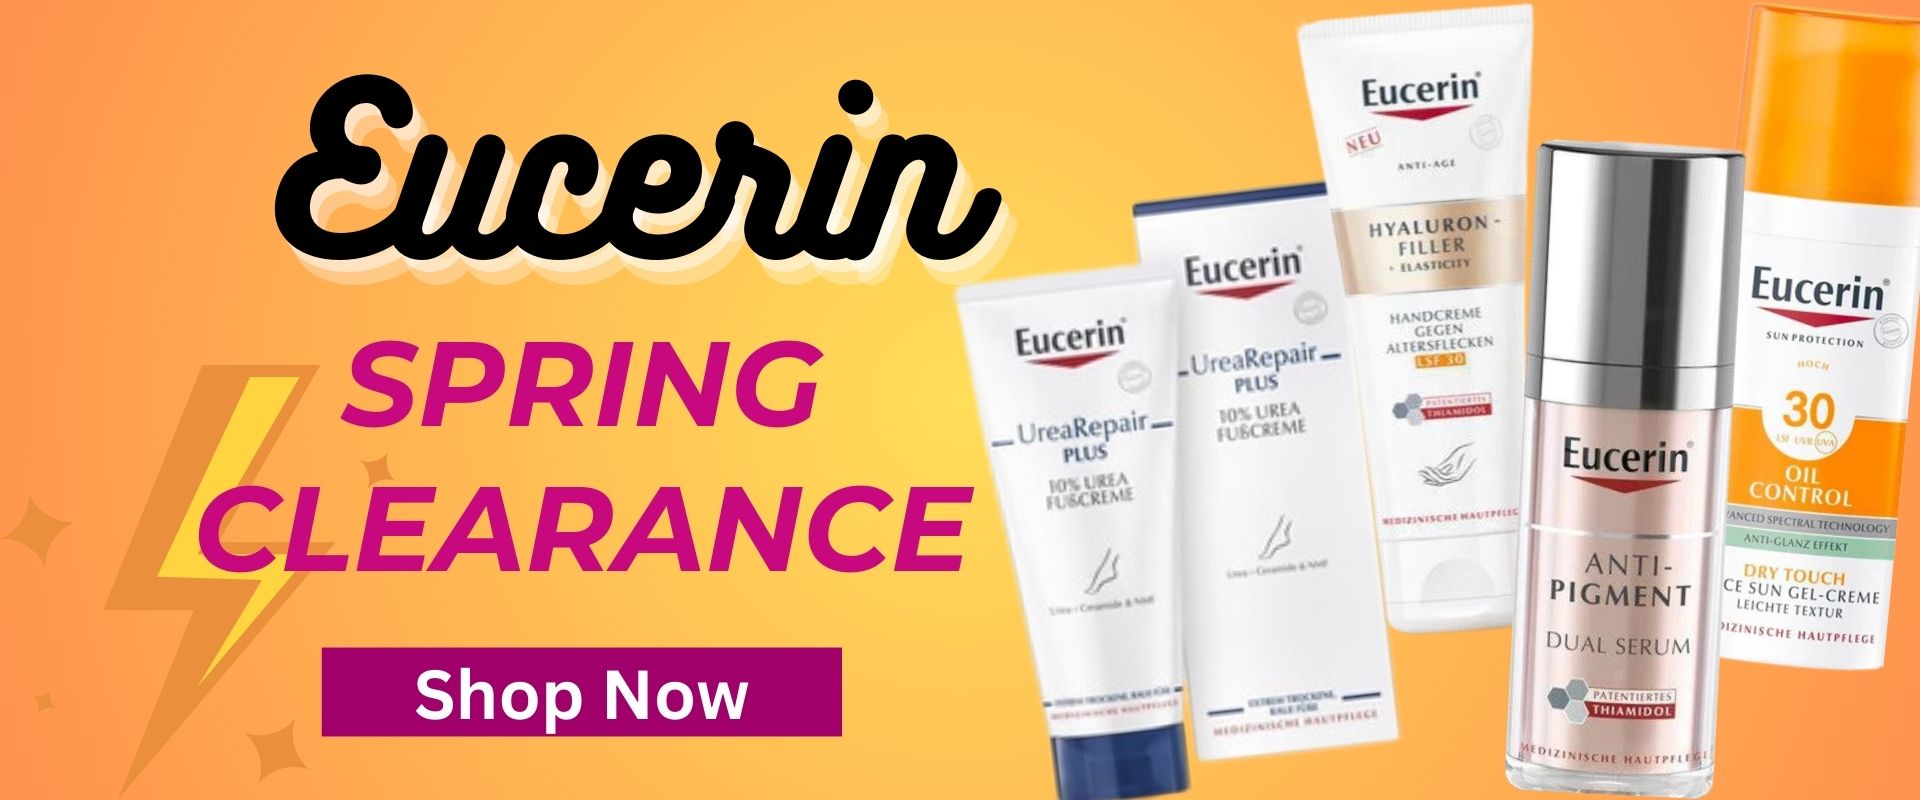 Eucerin Spring Clearance Sell includes UreaRepair Plus 10% Foot Cream, Hyaluron-Filler Hand Cream, Oil Control Sun screen and more.